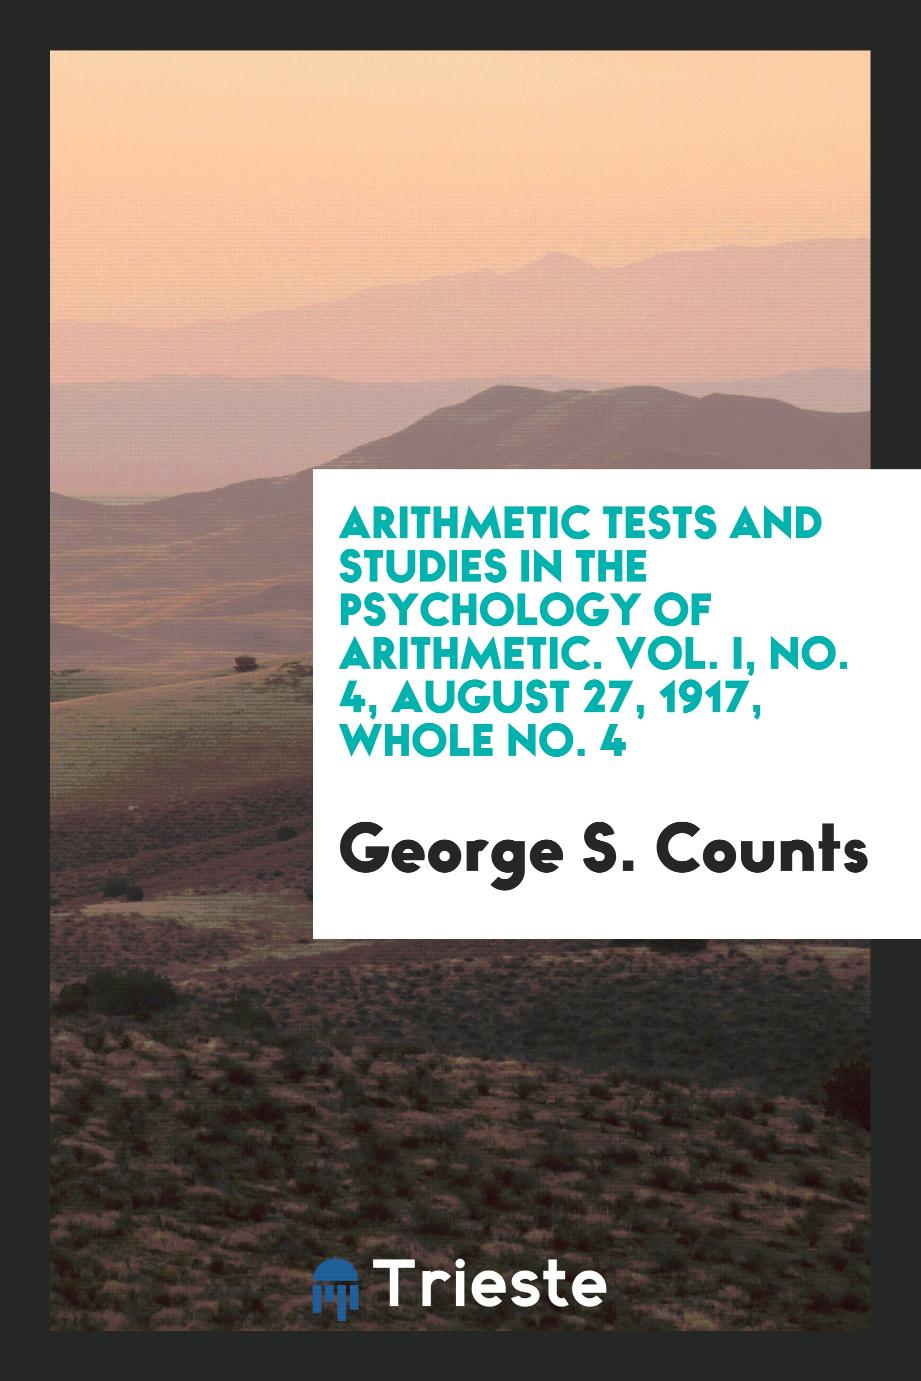 Arithmetic Tests and Studies in the Psychology of Arithmetic. Vol. I, No. 4, August 27, 1917, Whole No. 4